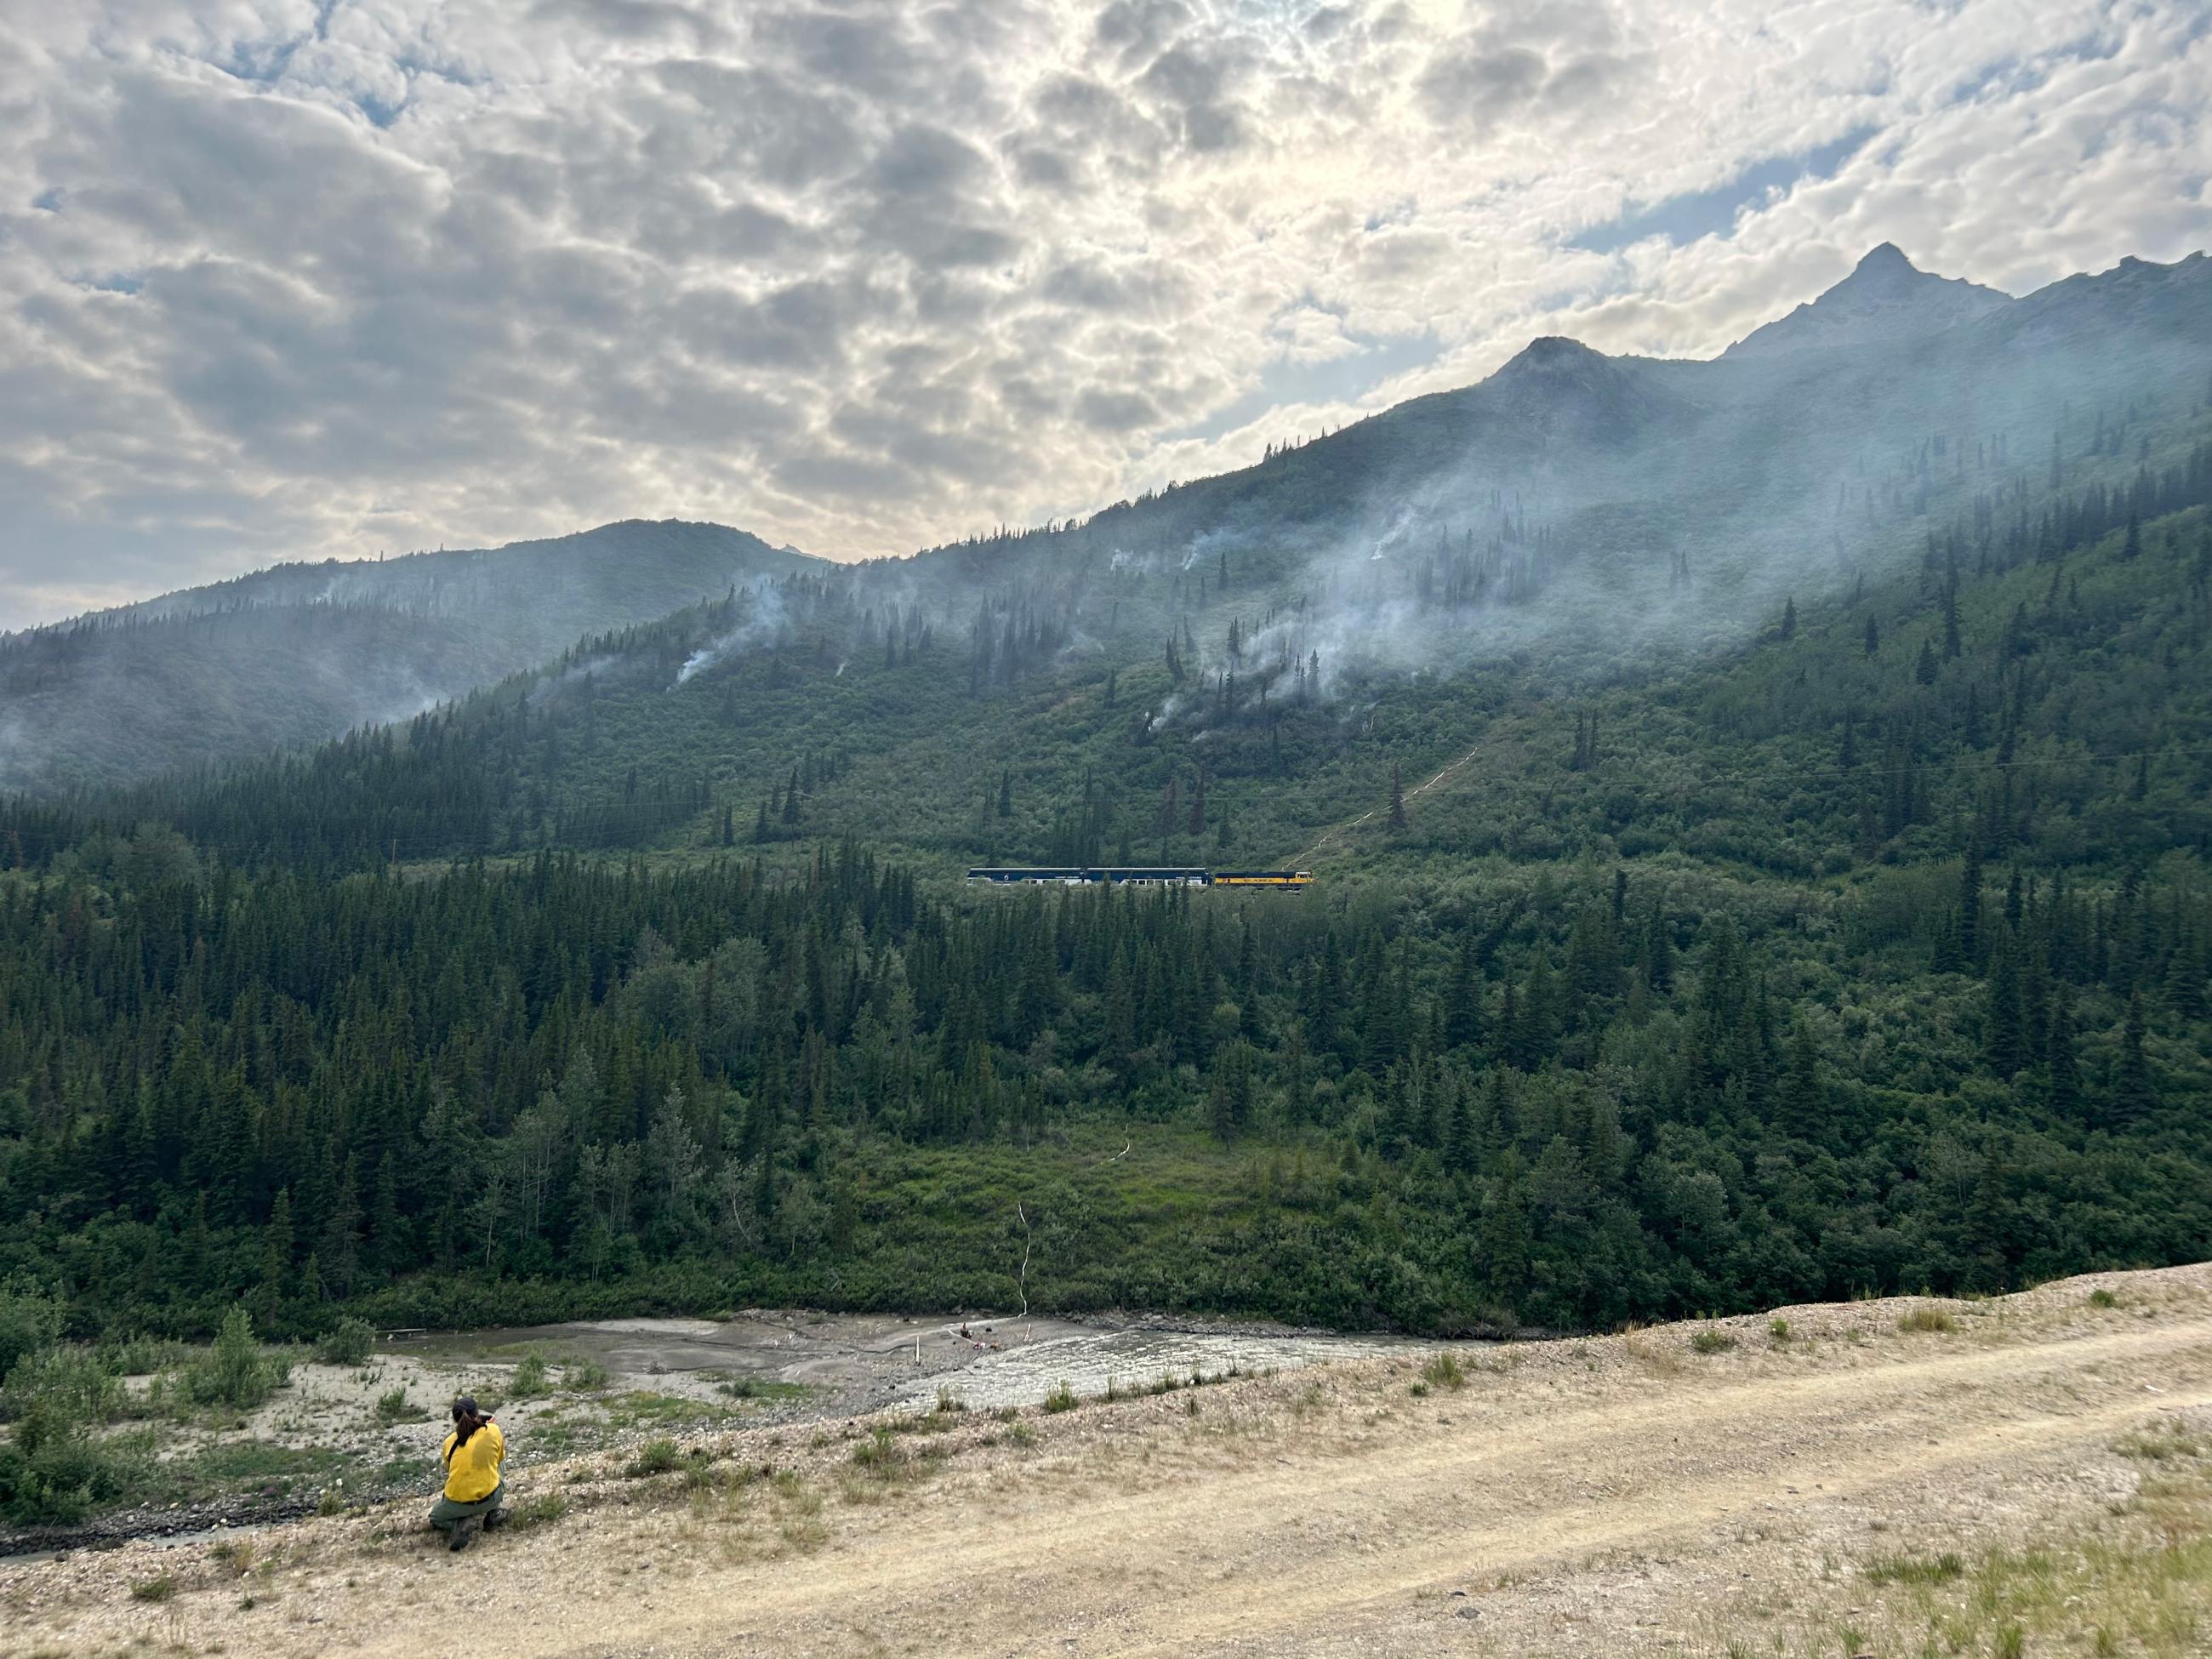 A train rolls through the fire area, a firefighter takes a photo.